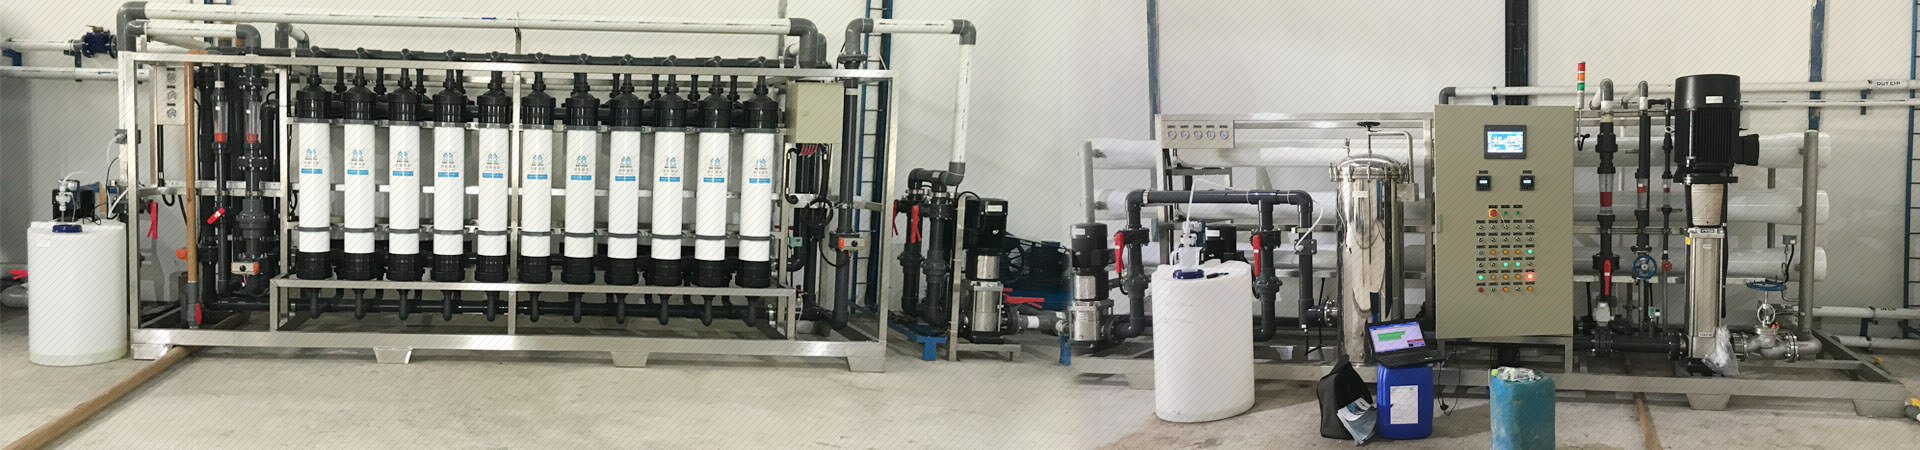 category-Reverse Osmosis Systems Manufacturers Supplier | Ocpuritech-Ocpuritech-img